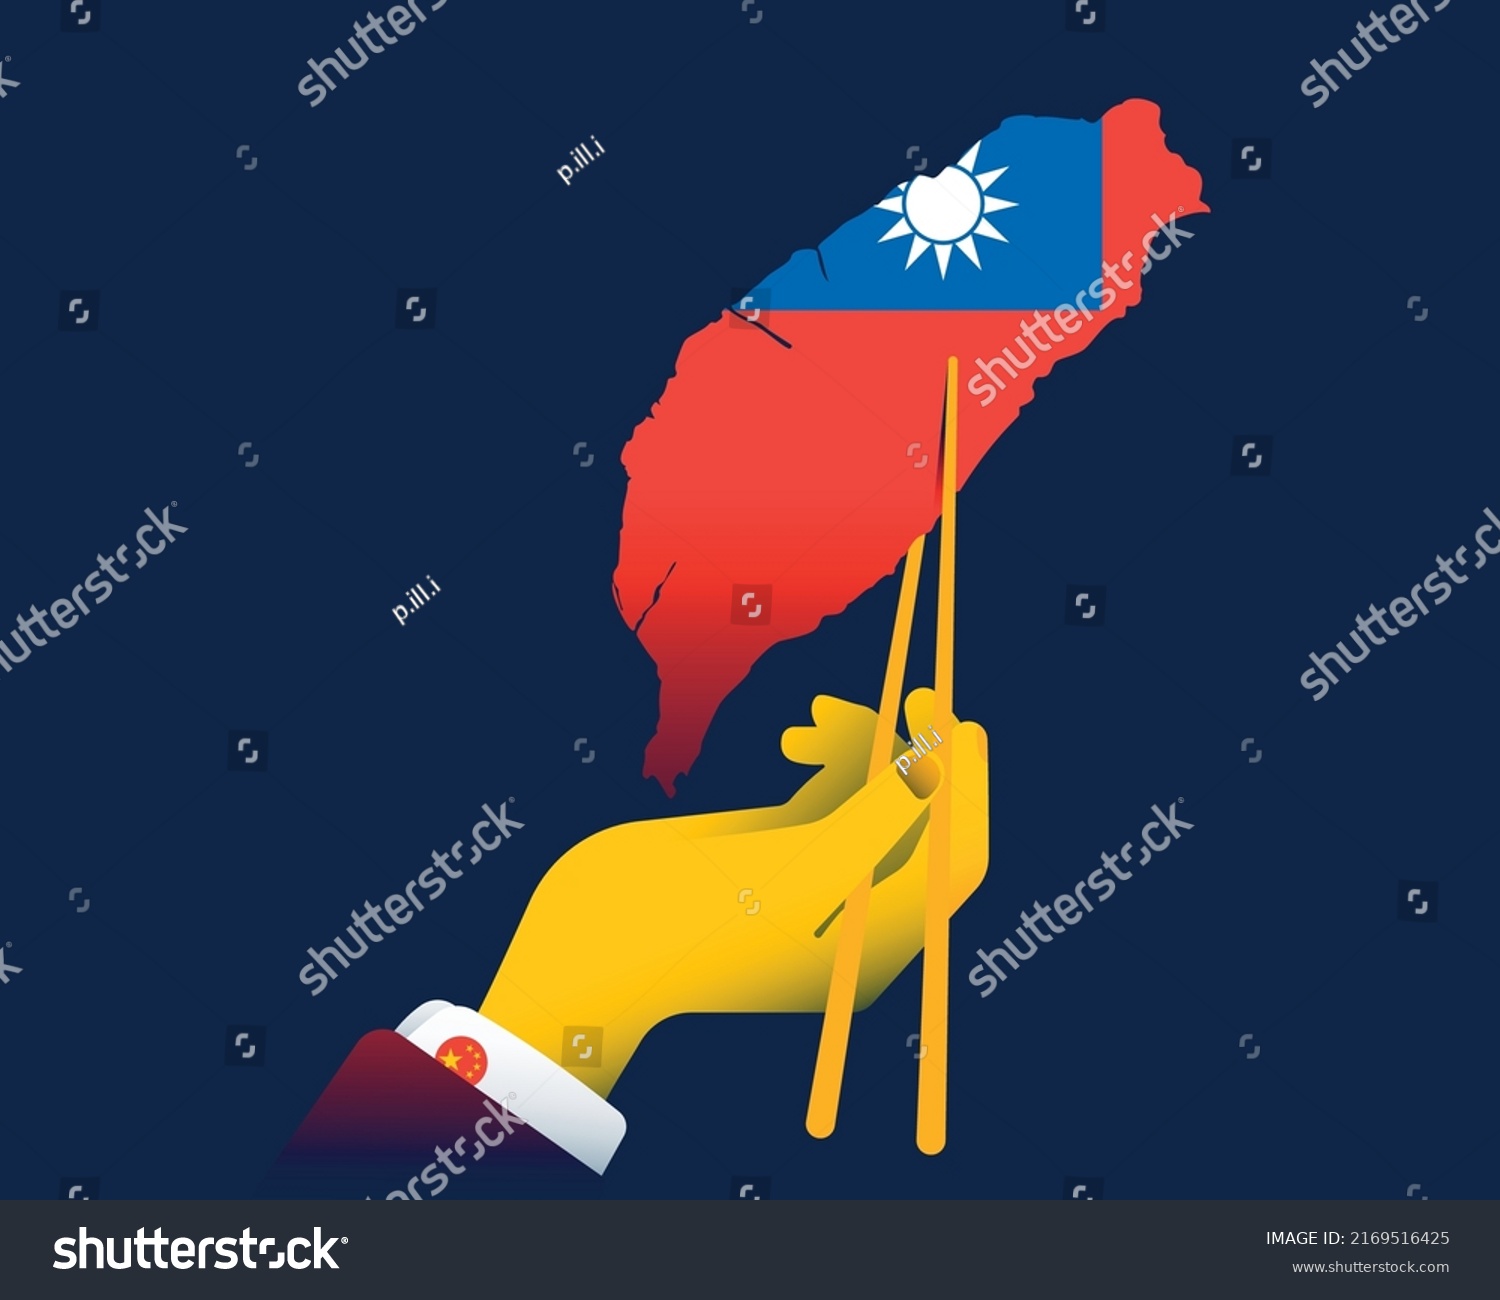 SVG of Chinese hand holds the outline of the Taiwan island with Chinese chopsticks. The concept of Taiwan and China relations. China's power over Taiwan. Bad international relations, global world trade. svg